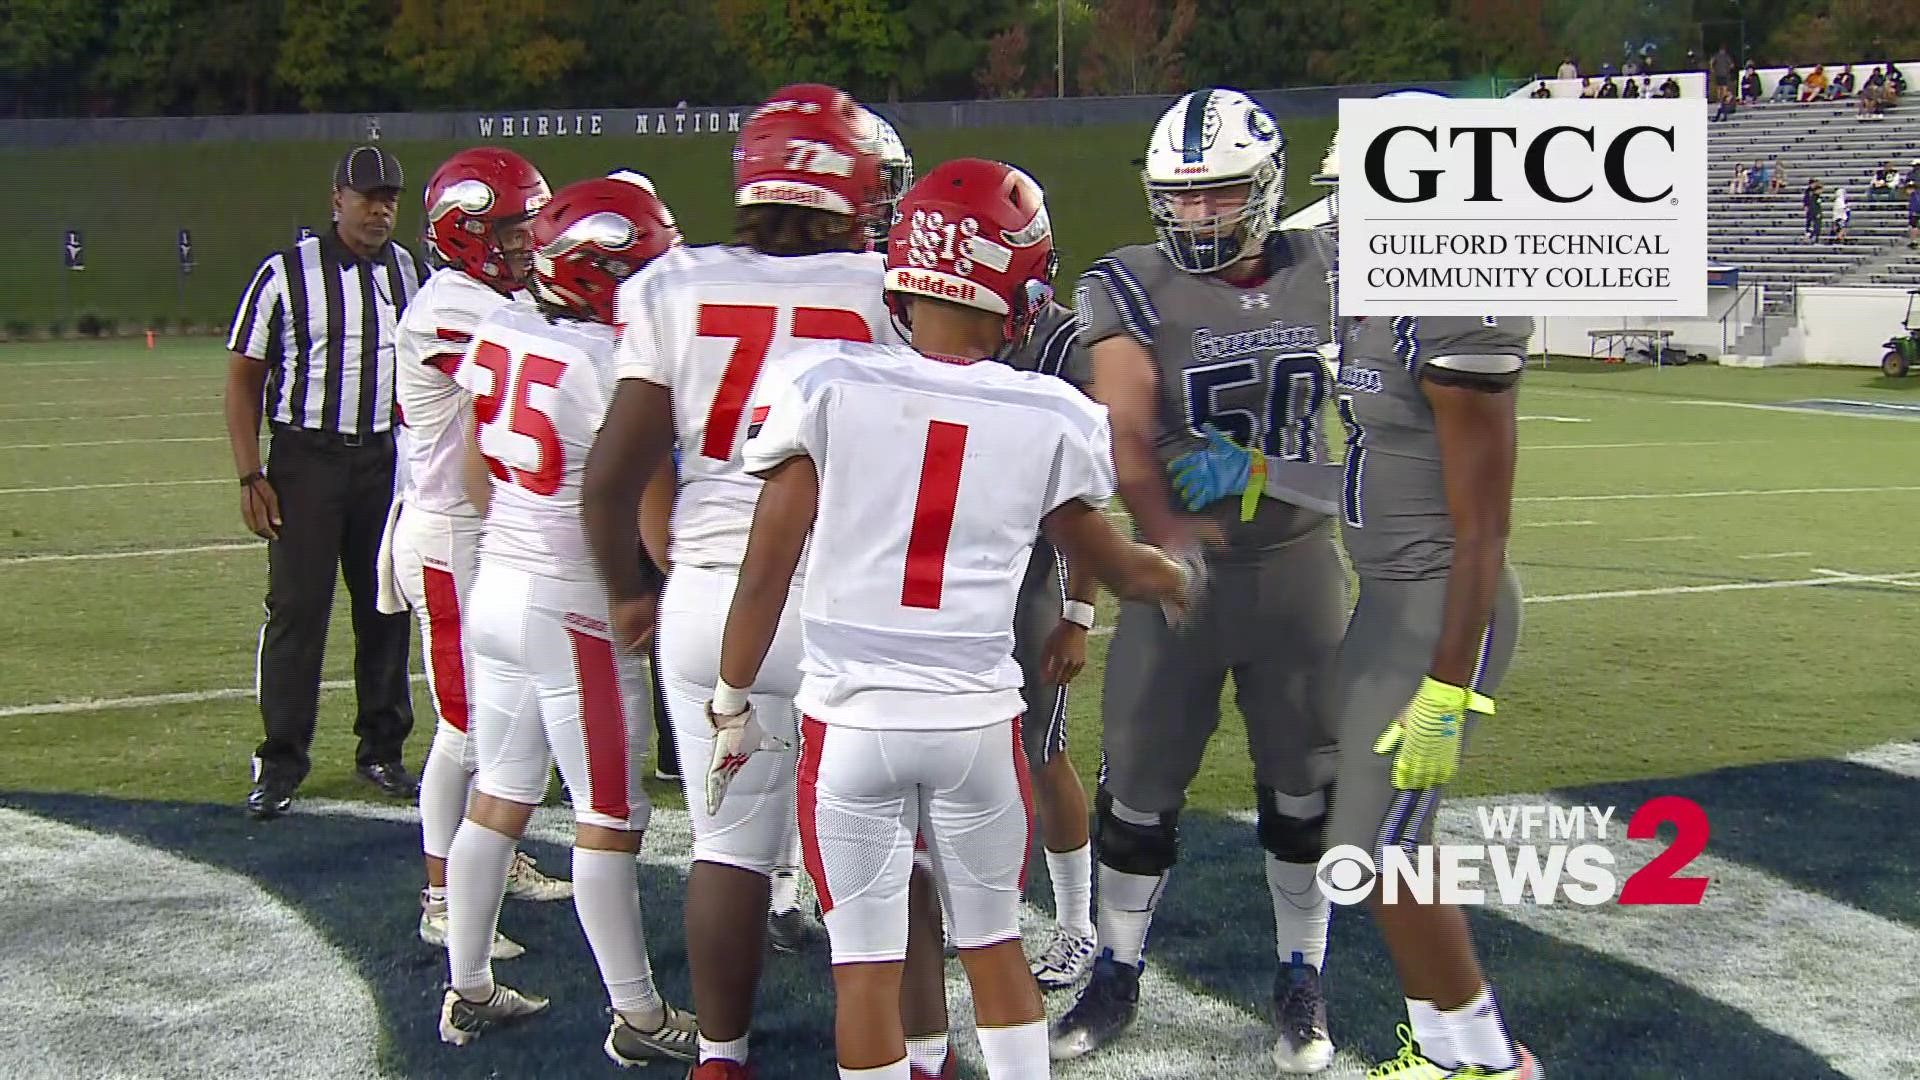 Grimsley gets the win in our Friday Football Fever Game of the Week and moves to 5-0 on the season.